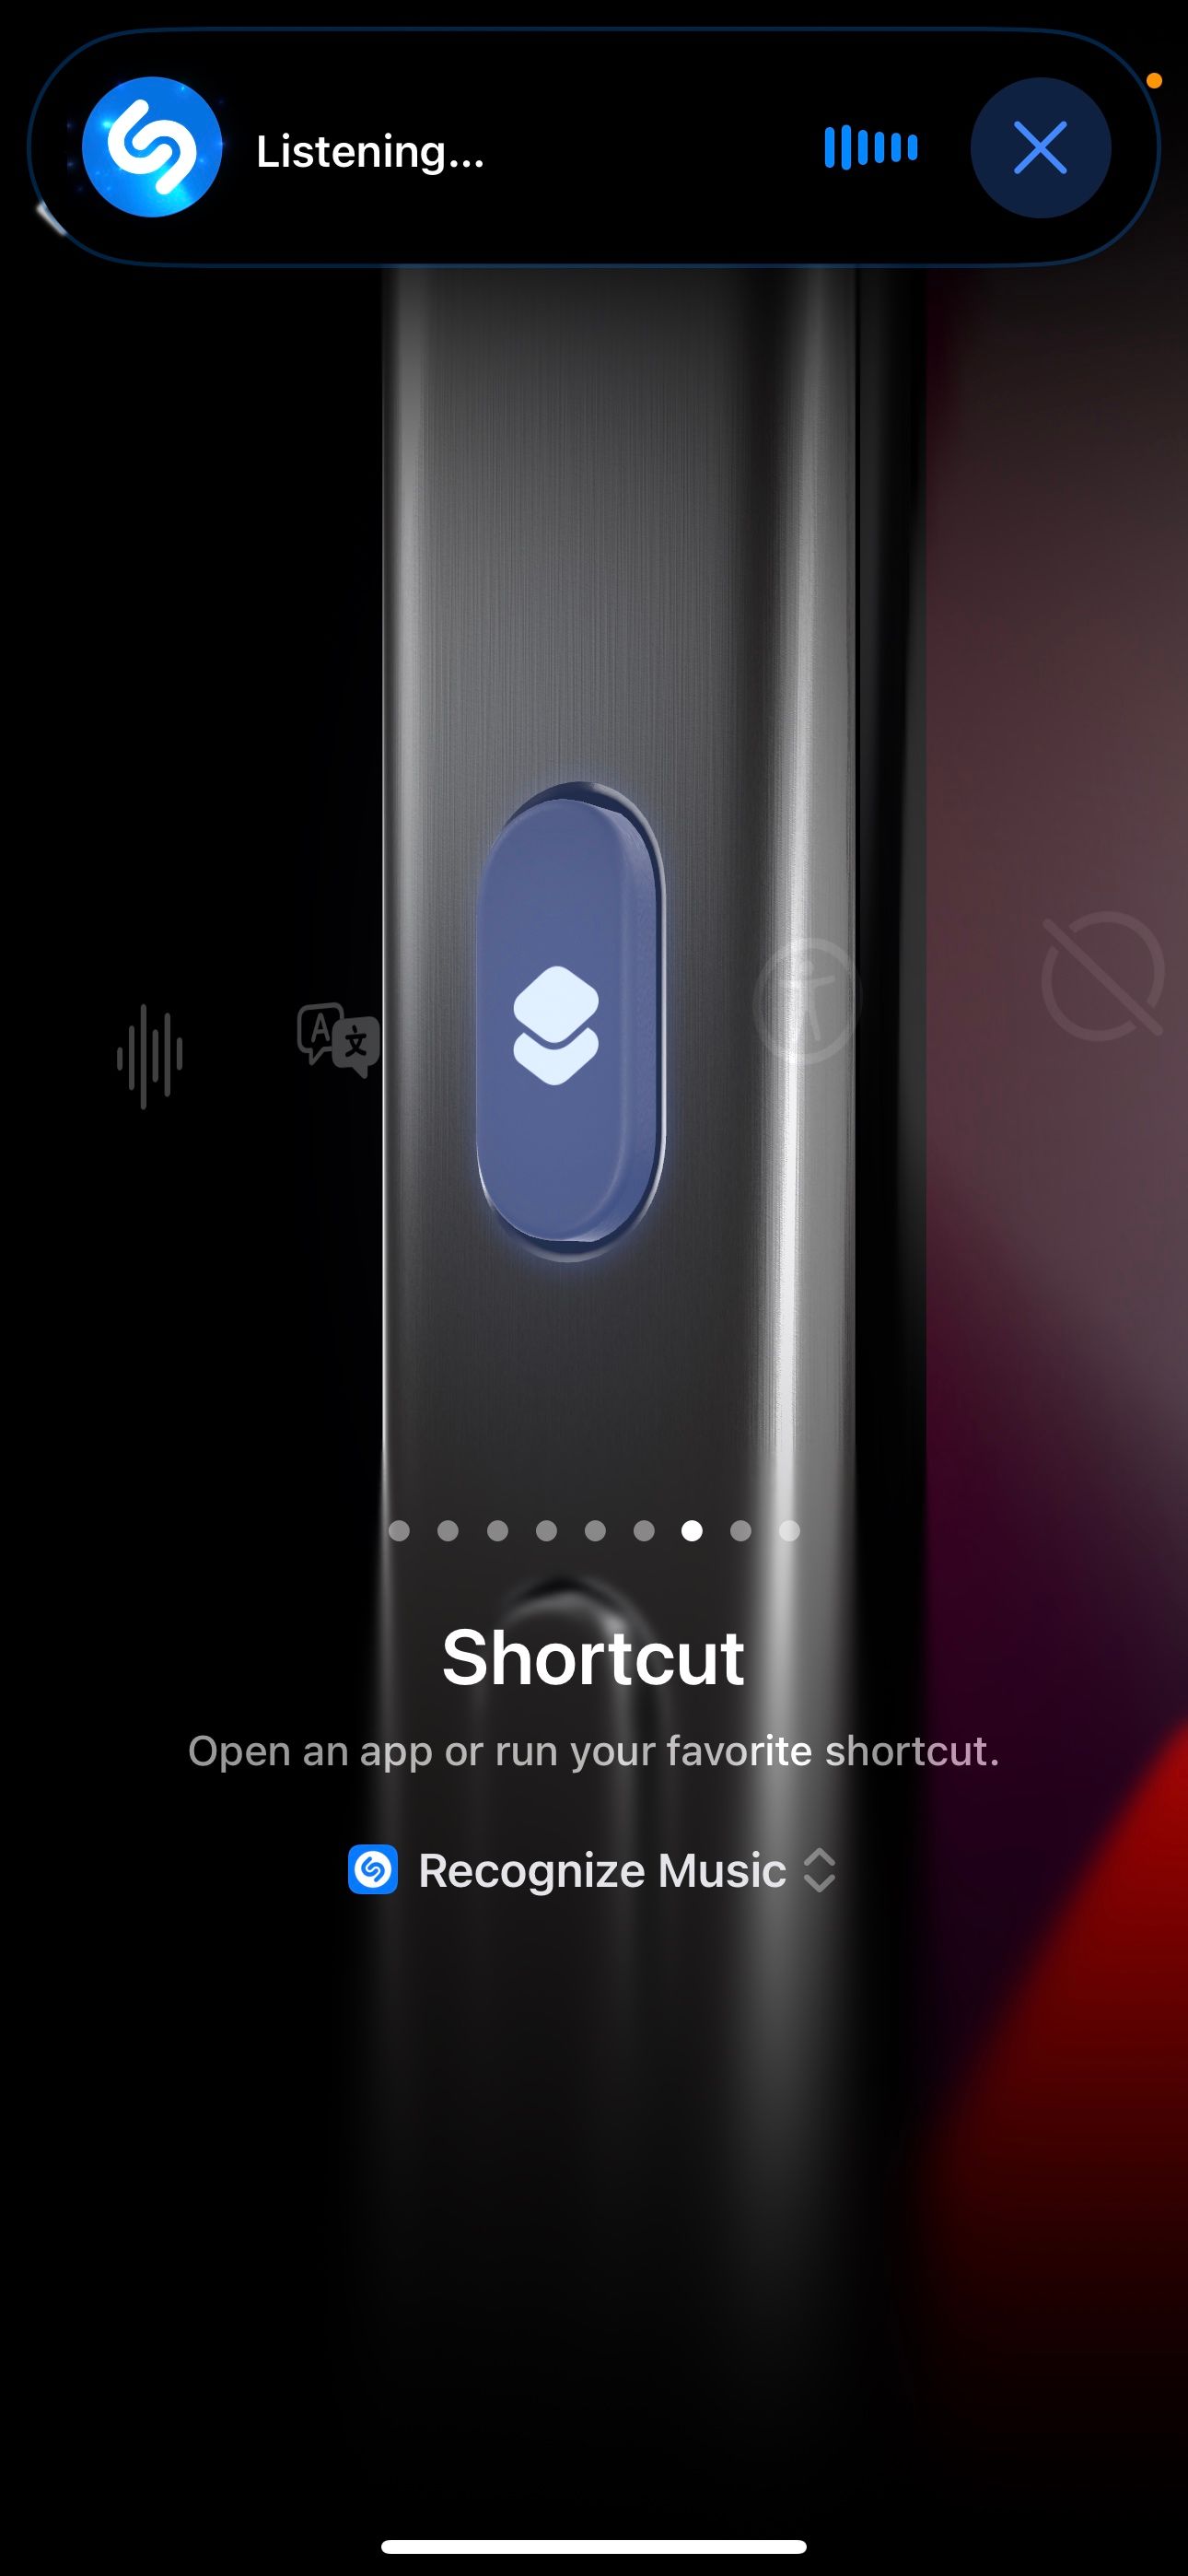 Shazam listening for music from Action Button Shortcut